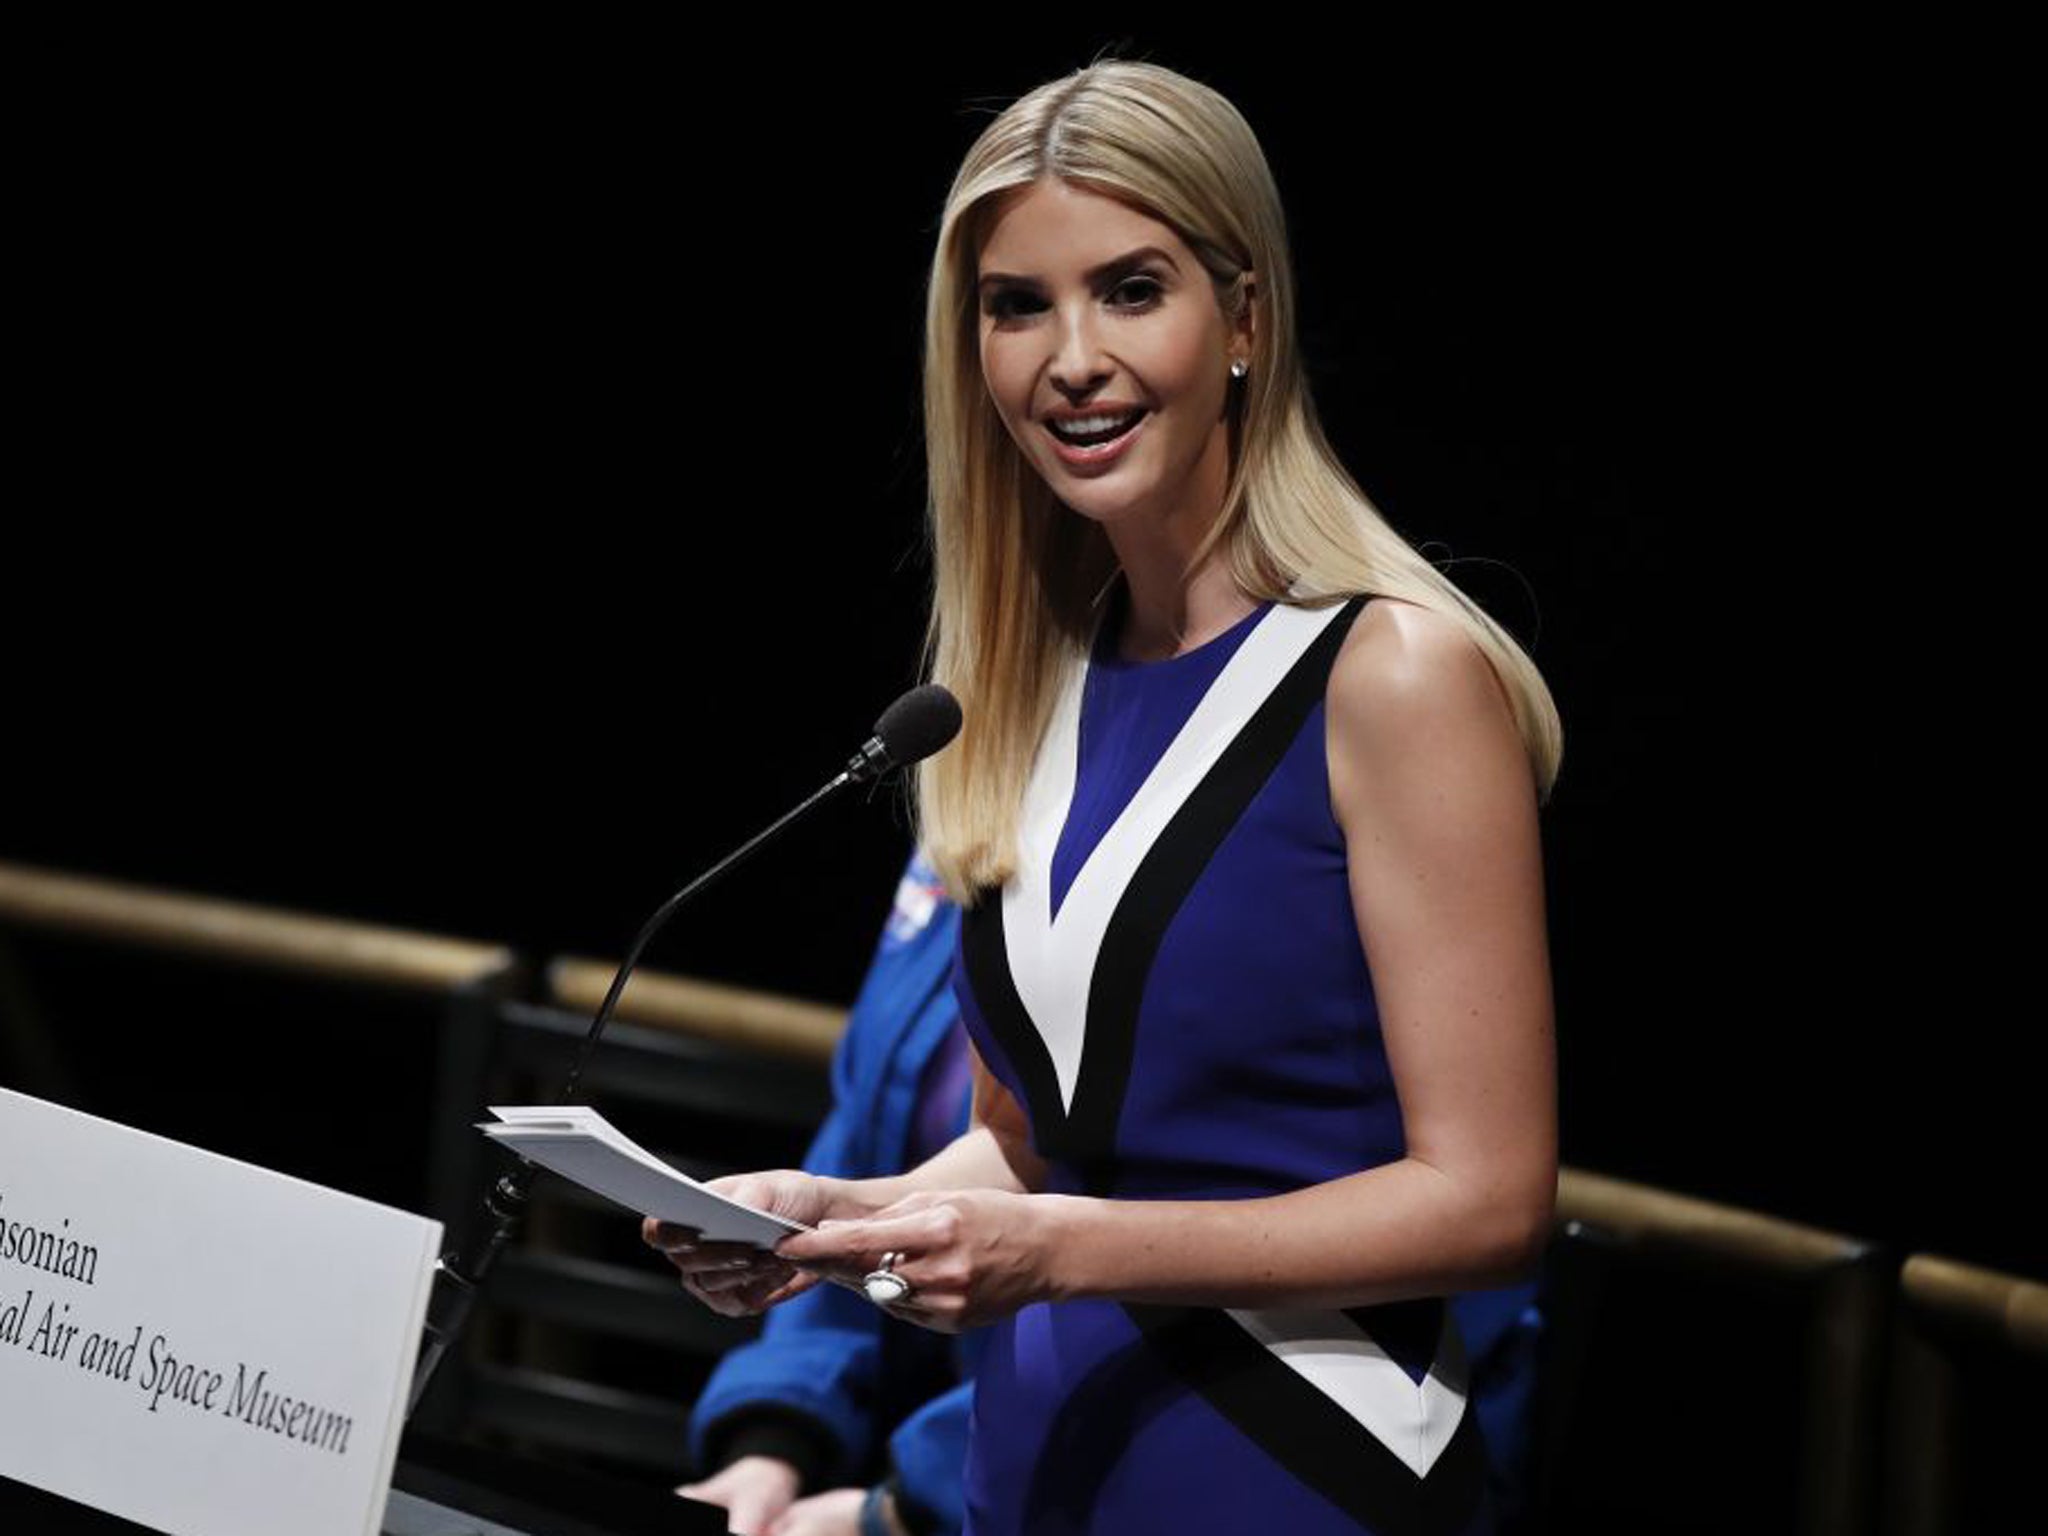 Ivanka Trump speaks at the Smithsonian's National Air and Space Museum in Washington